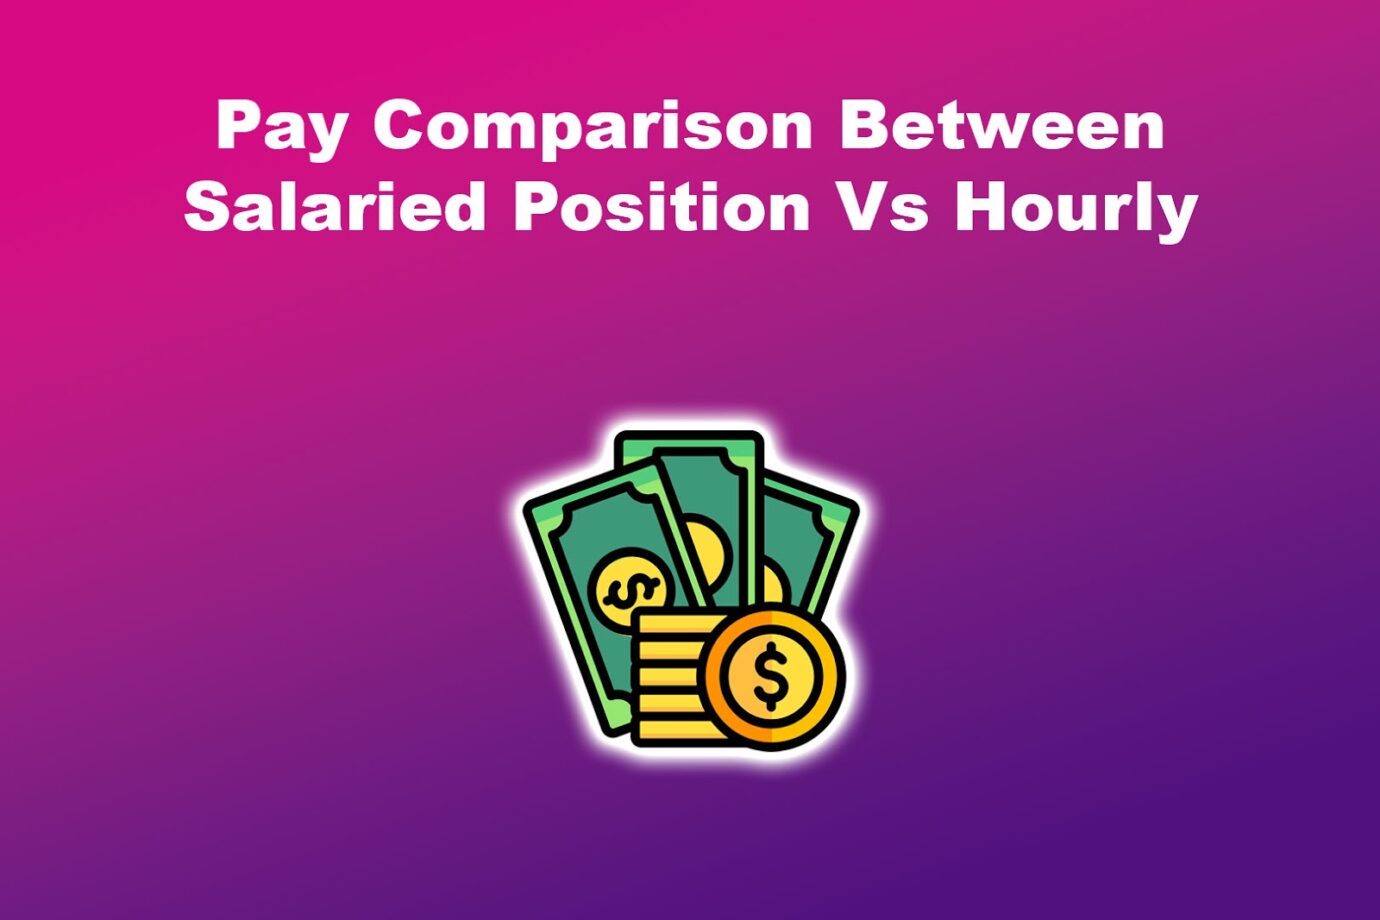 Pay Comparison Between Salaried Position Vs Hourly